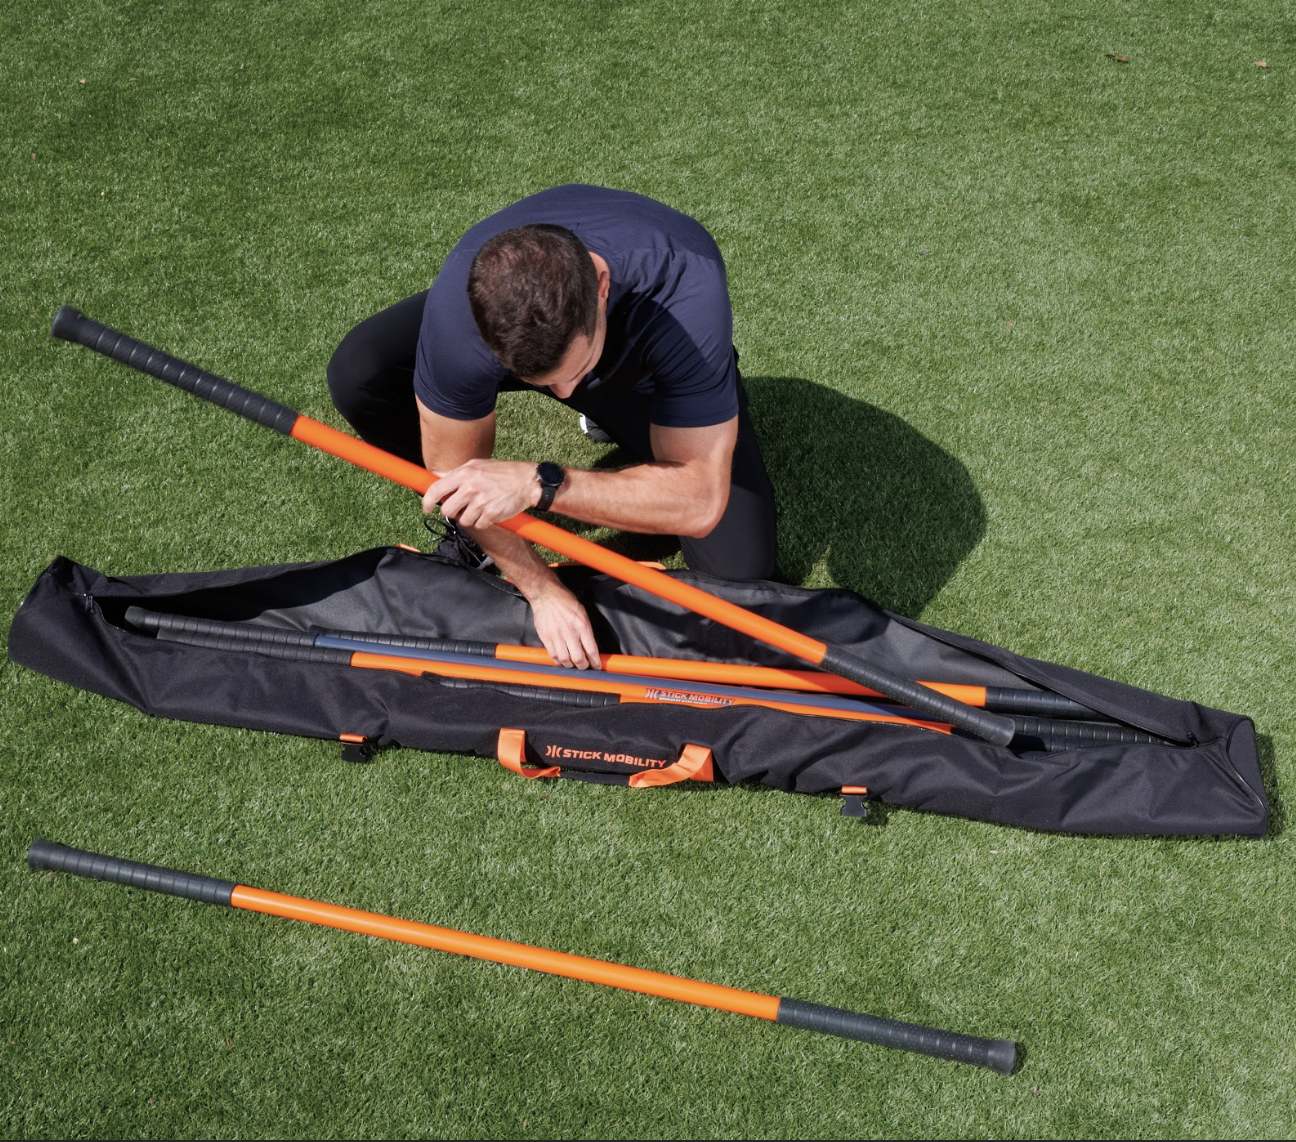 How to Care for your Stick Mobility Training Sticks: Essential Tips for Safety and Longevity